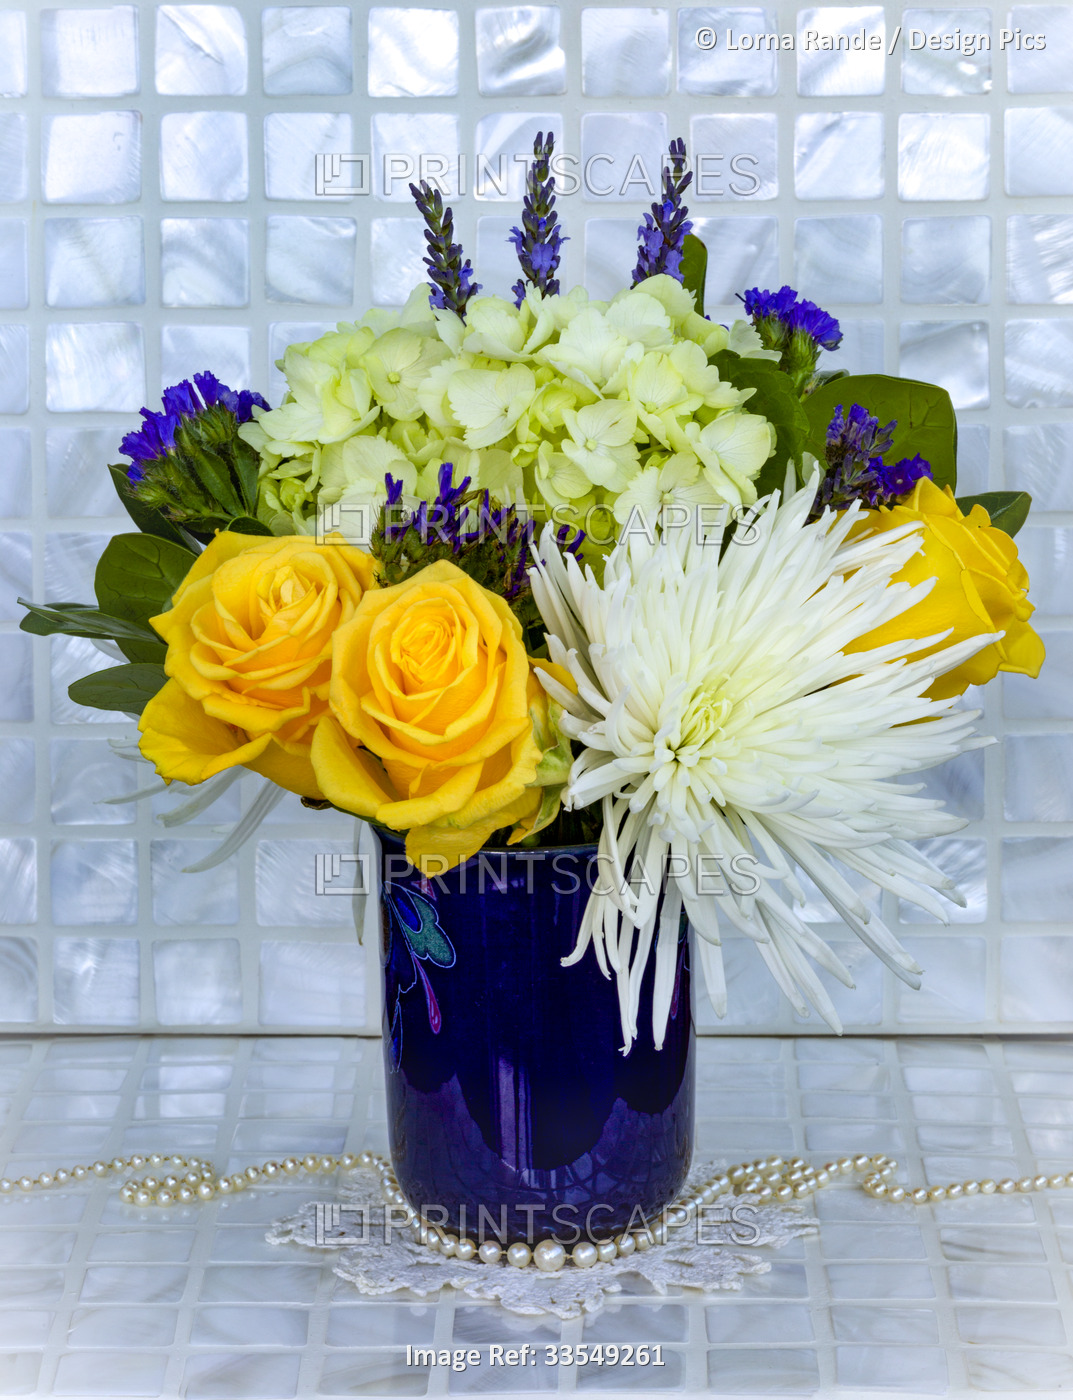 Bouquet of fresh cut flowers in a blue vase with a crocheted doily and pearls, ...